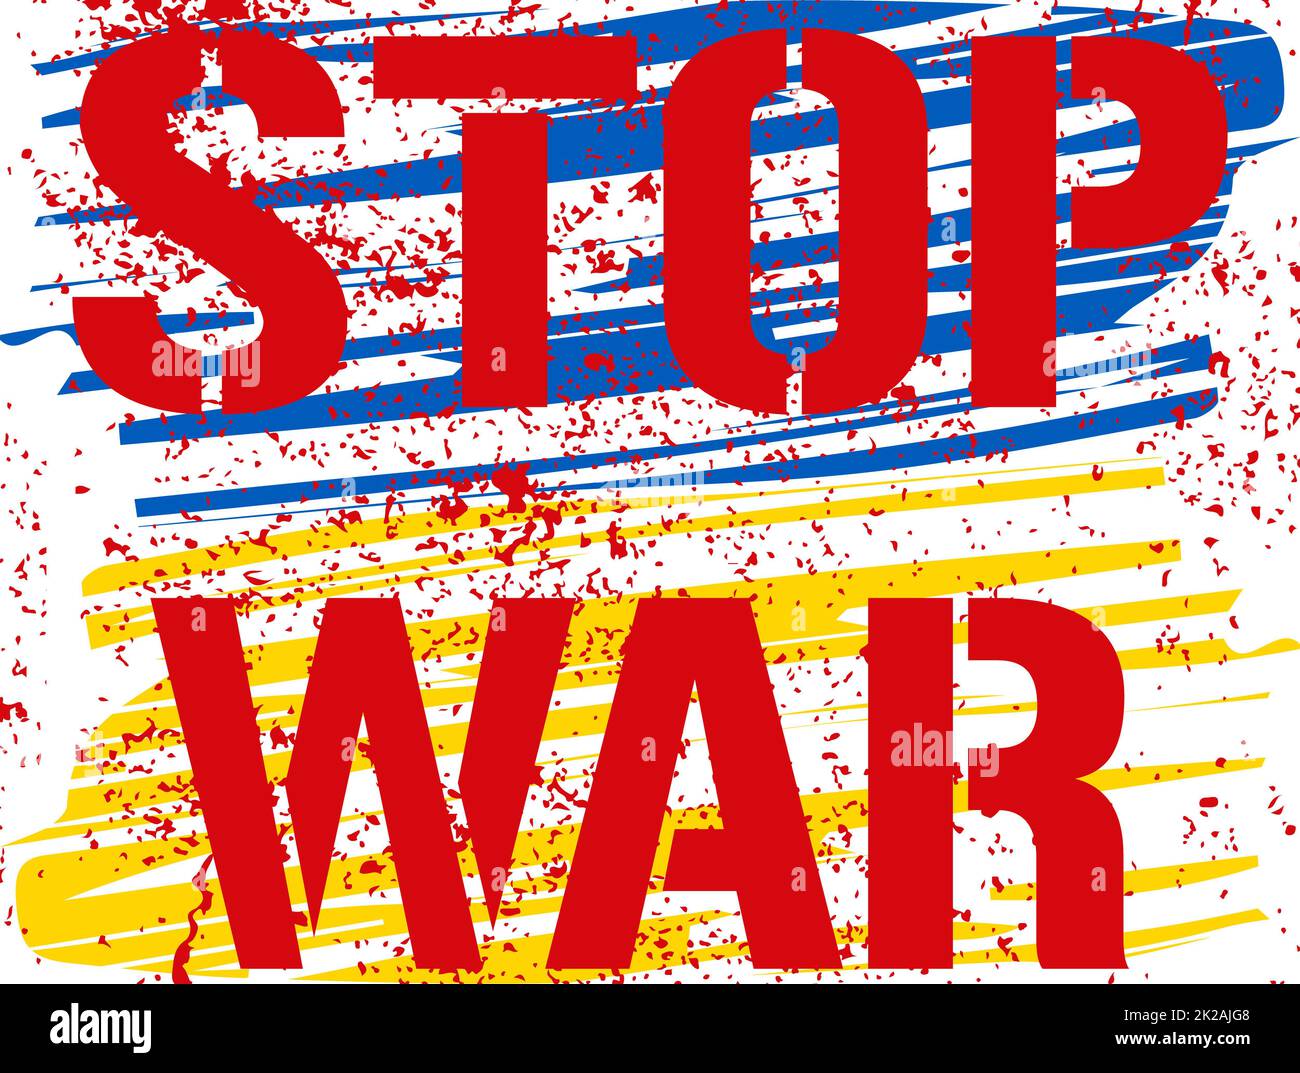 Stop war - text stylized as blood on the paint for Ukrainian flag. Red graffiti protest sign. Call to stop the war in the world. The armed conflict in Ukraine must be stopped. Bloody peace message. Stock Photo